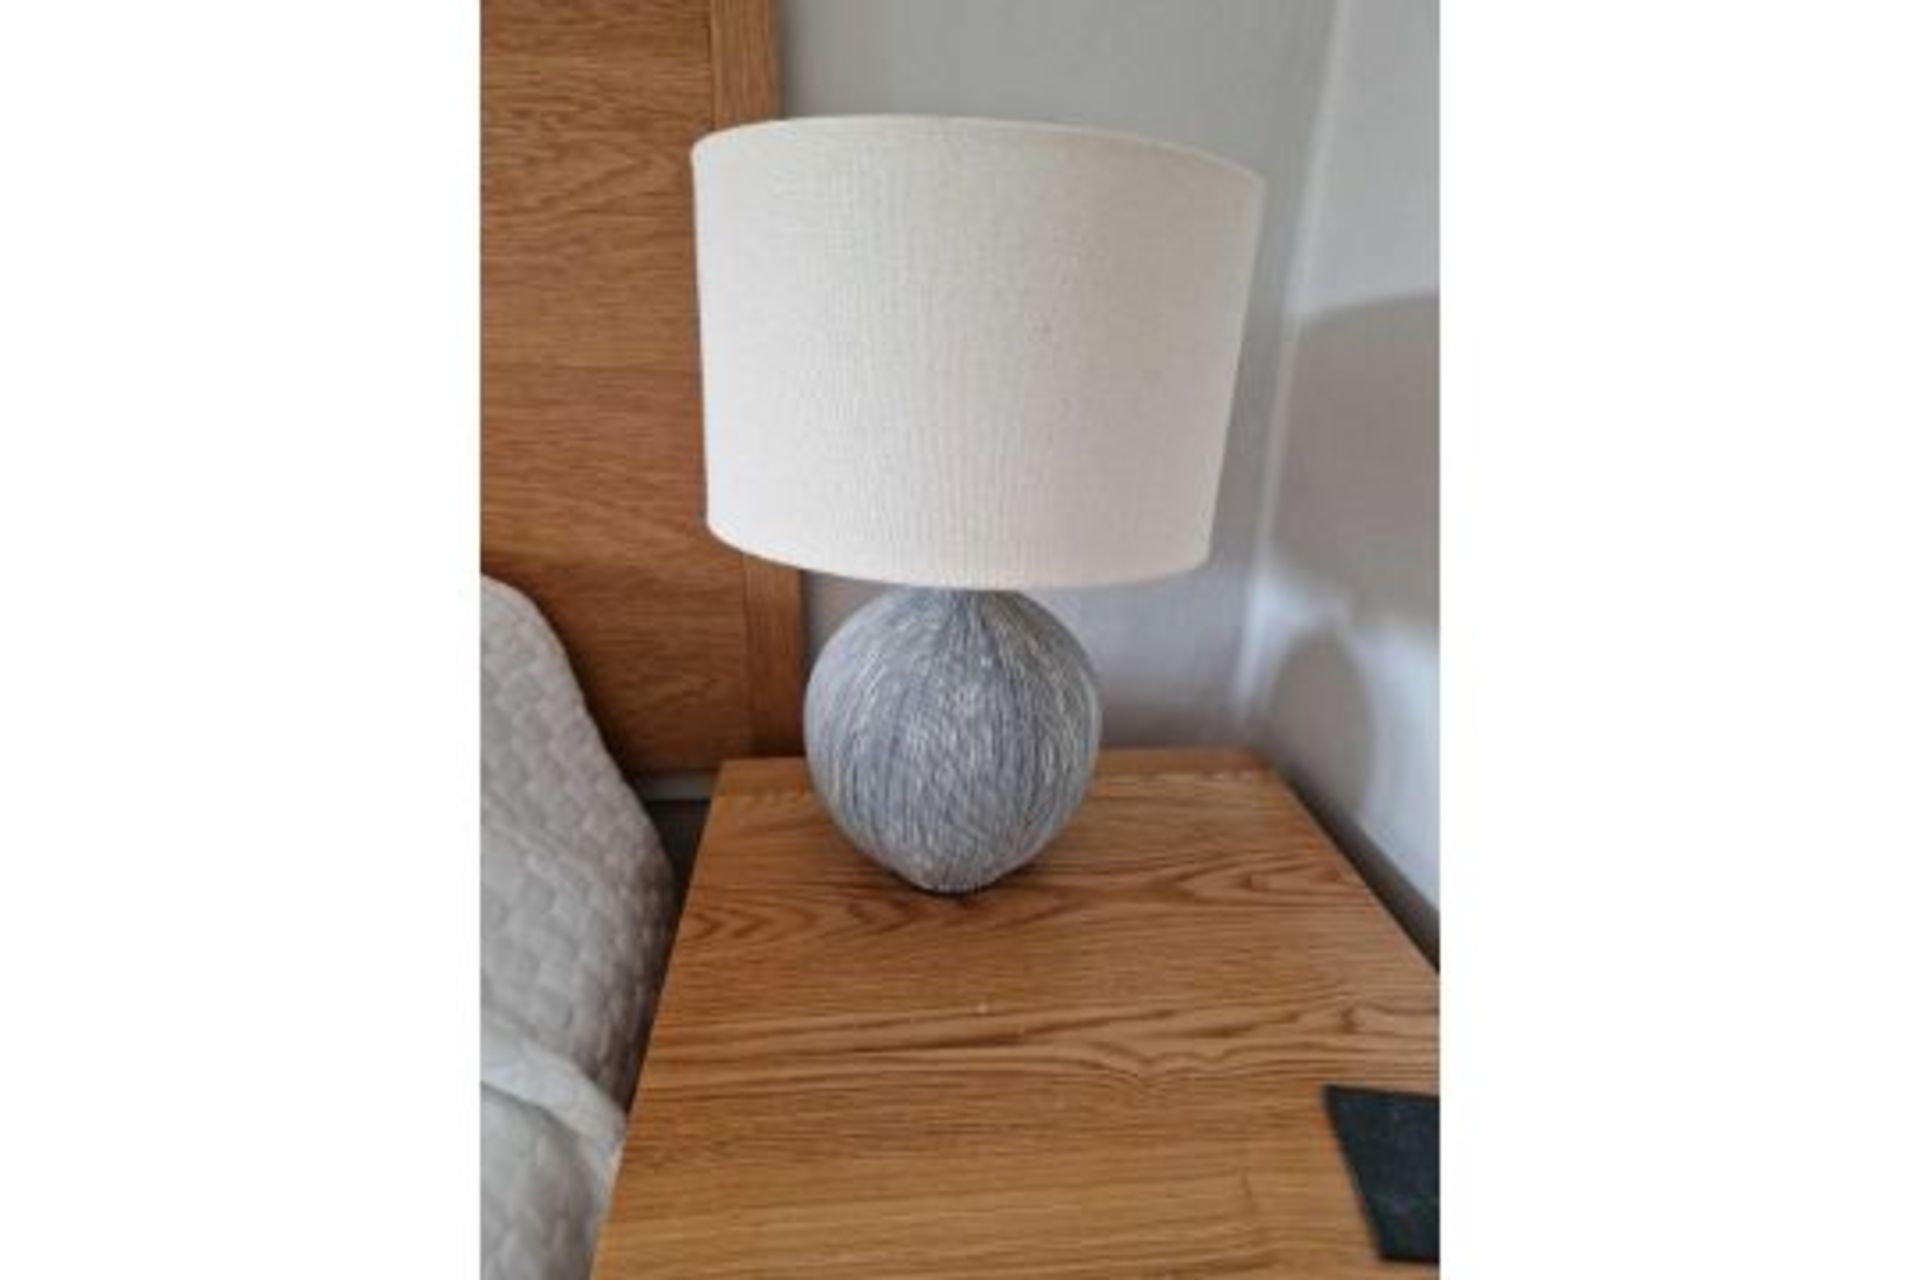 A Pair Of Ceramic Table Lamps Slate With A Gentle Ridging Running Down The Budded Base This Table